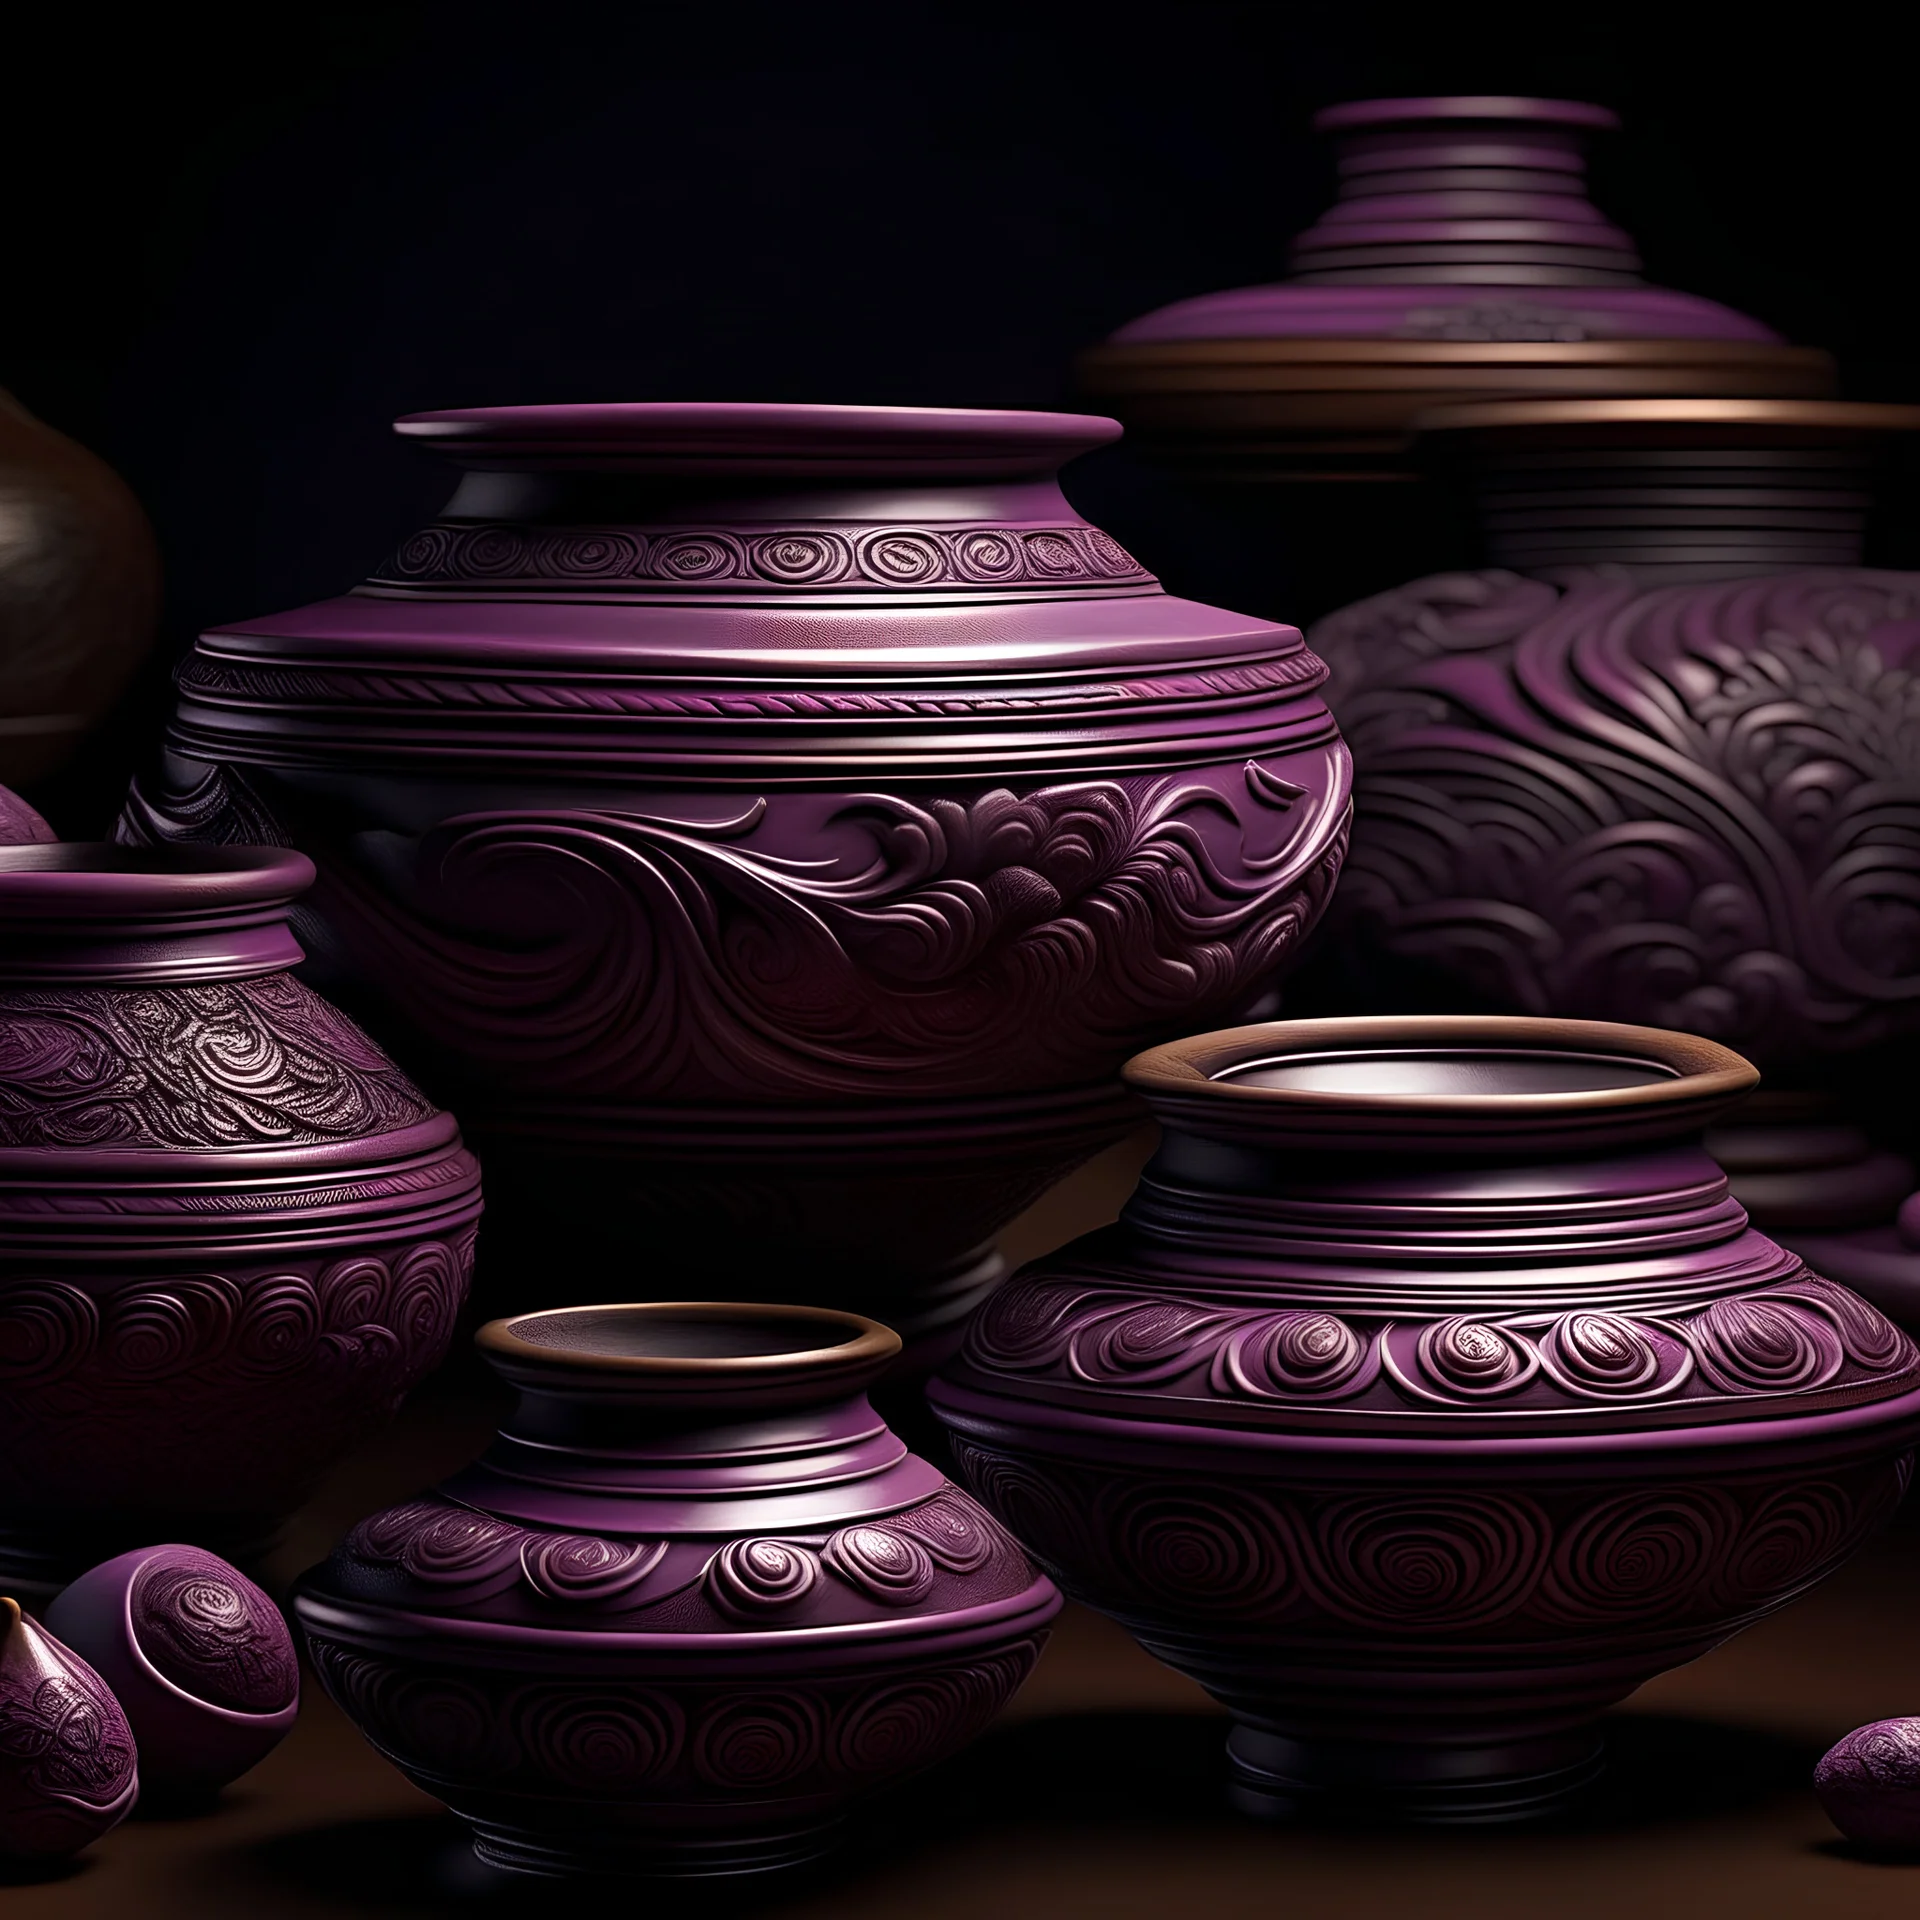 A set of luxurious Chinese folk style purple pottery pots, intricate and creative carving, exquisite craftsmanship, meticulous texture, exquisite artistic conception, high-quality photography, rich purple tones, exquisite and realistic design, perfect execution, aesthetic background, artistic talent, professional lighting, display fine details, designed by the famous craftsman ArtStation, with high-end jewelry in the background.